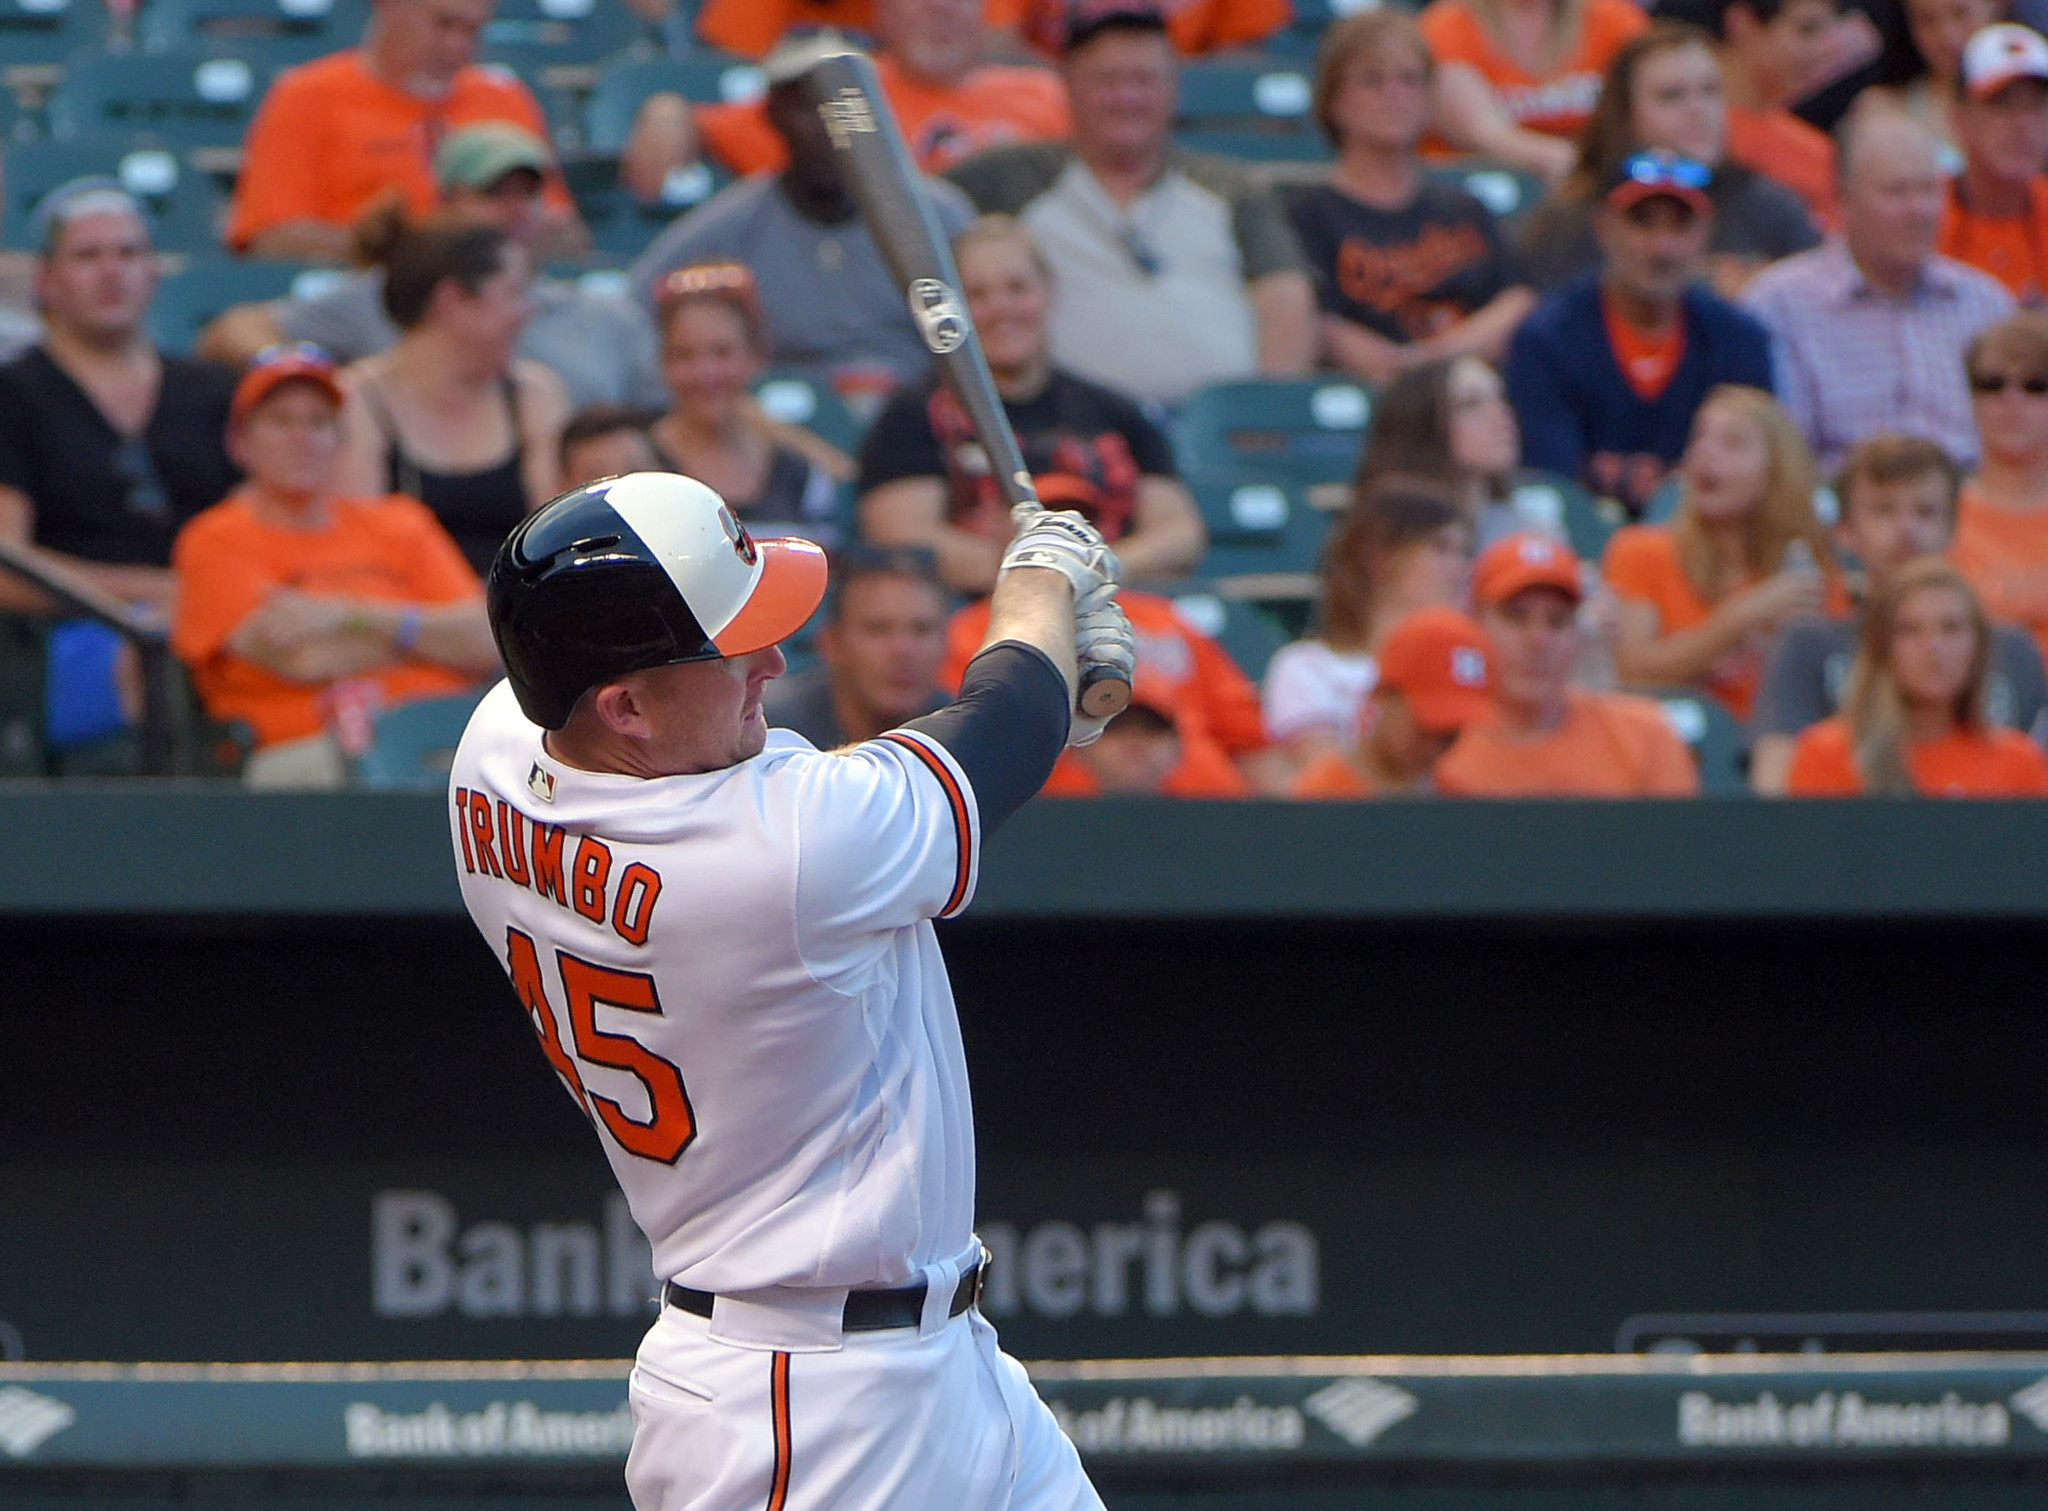 The Rockies are interested in Mark Trumbo, but they're in the same boat as the Orioles